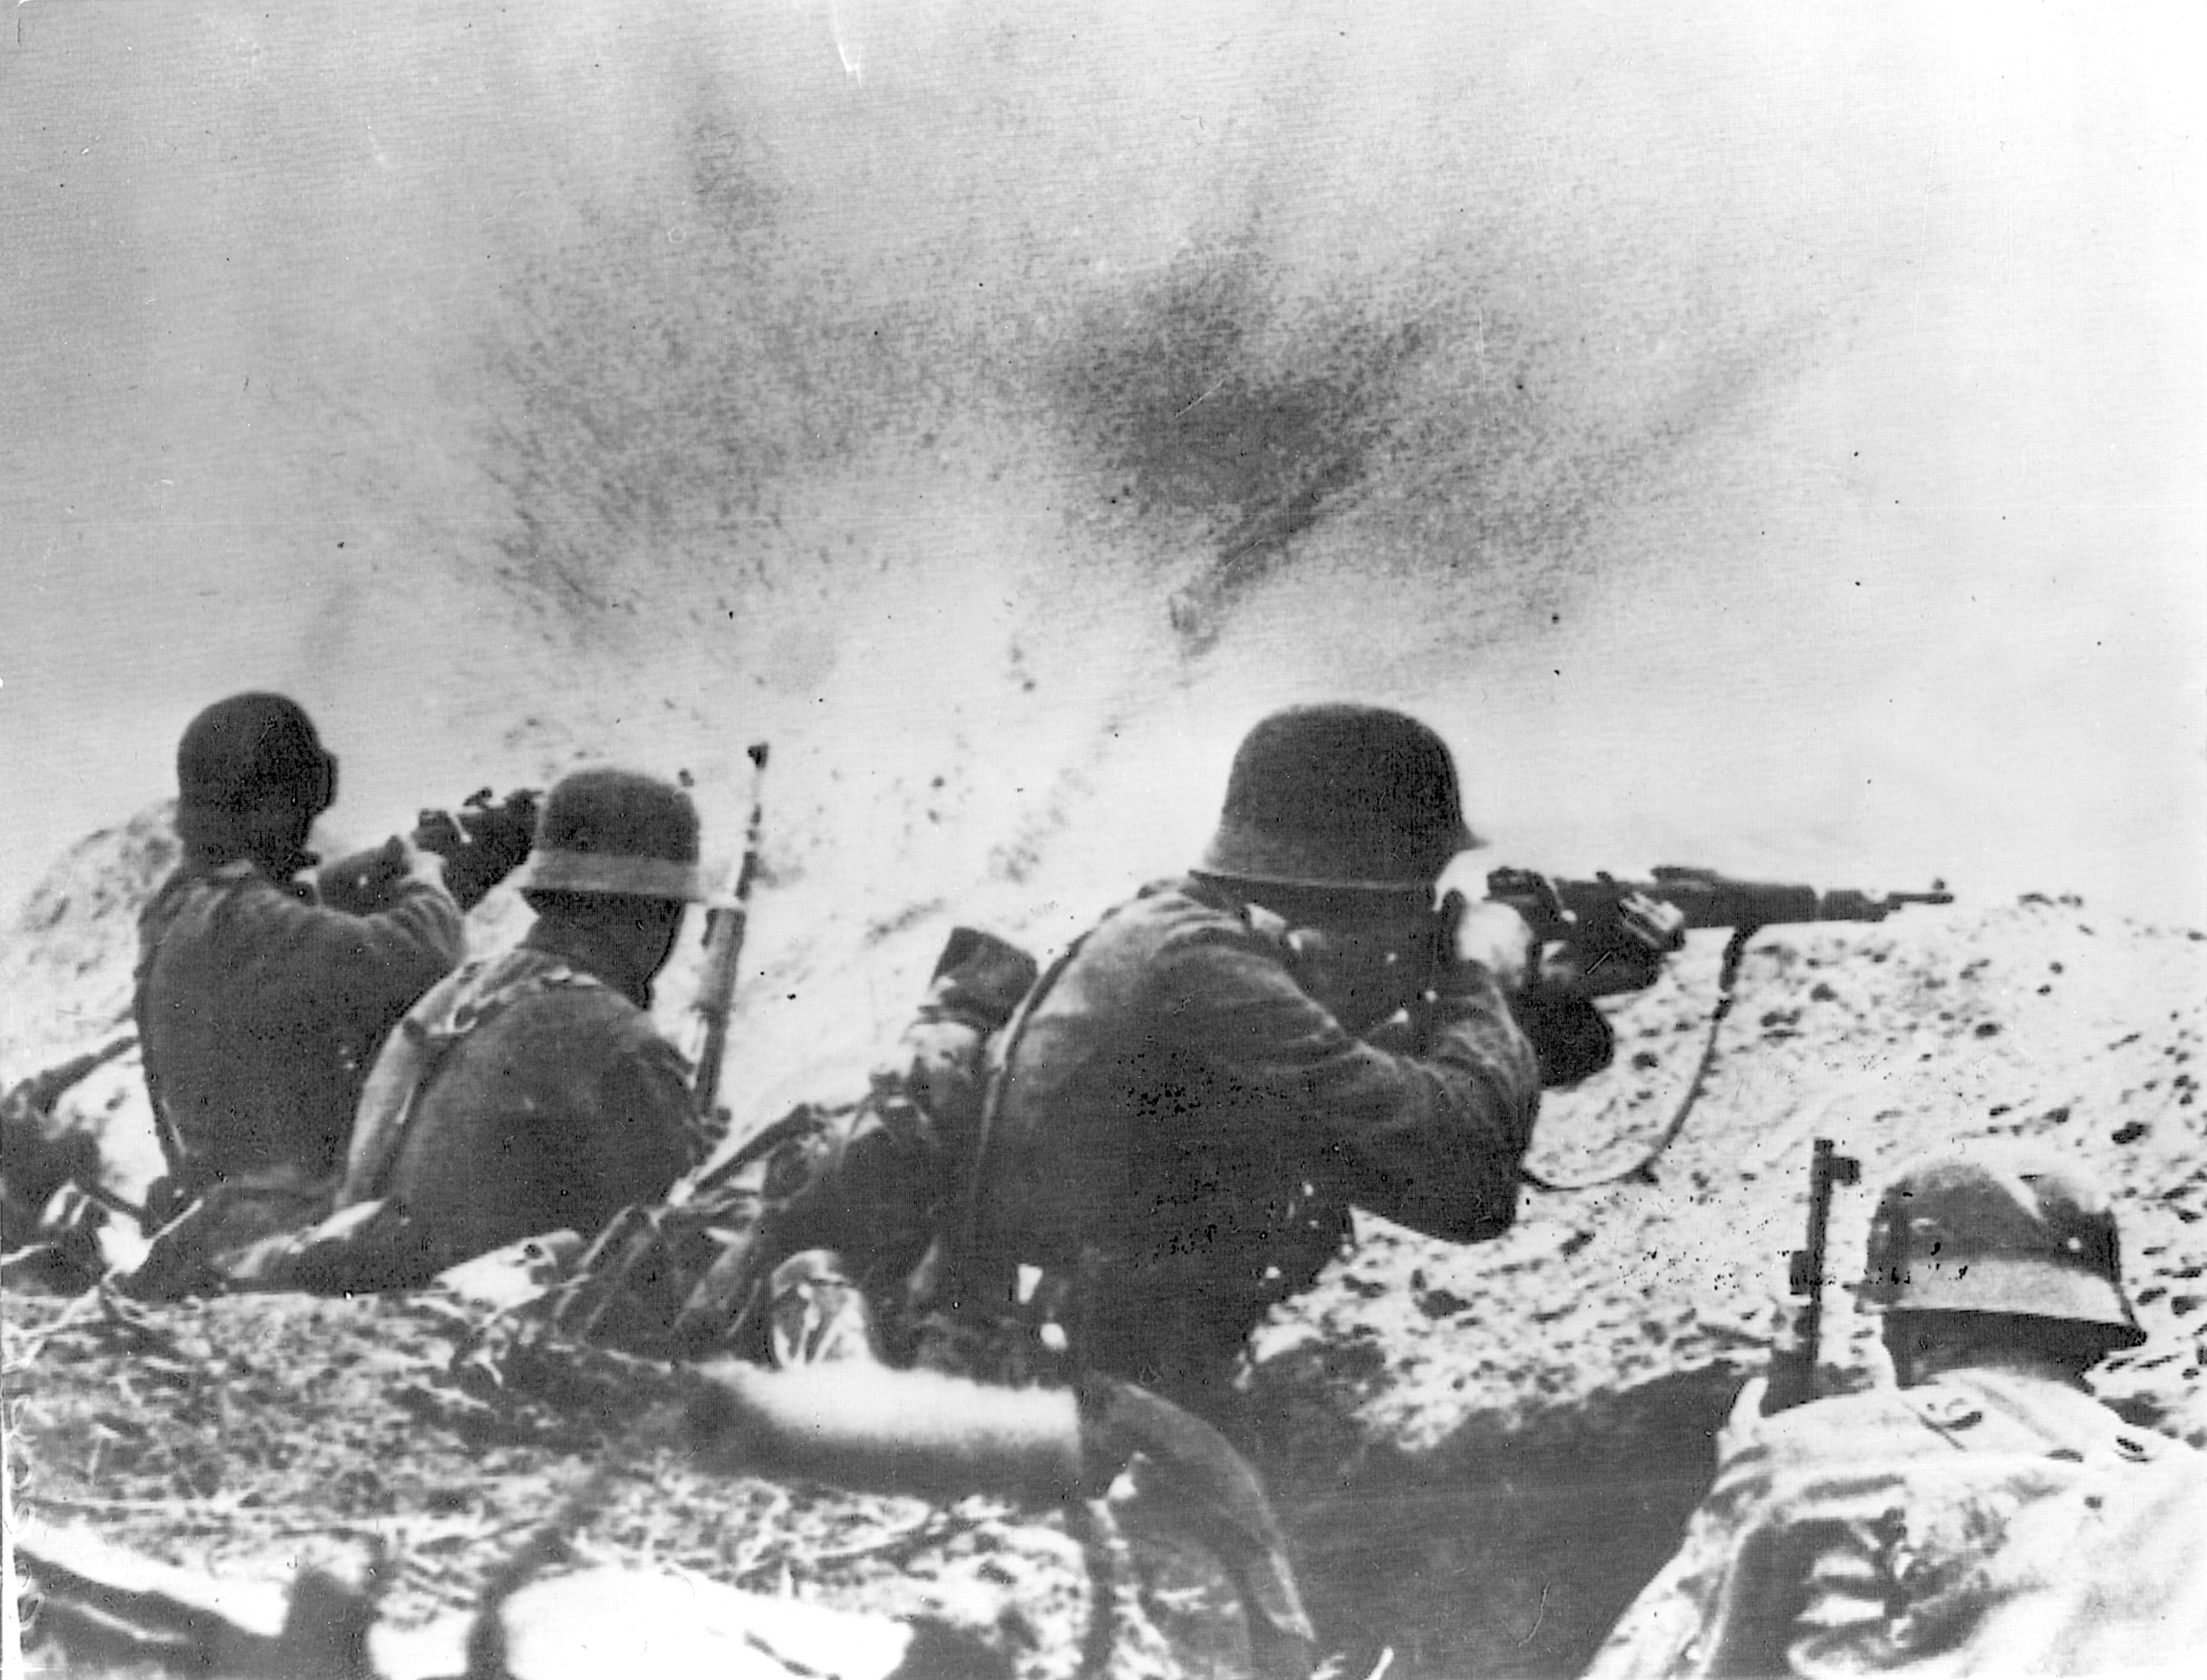 In the heat of combat, German soldiers crouch and fire their weapons feverishly from a trench line as Soviet marines advance against them.